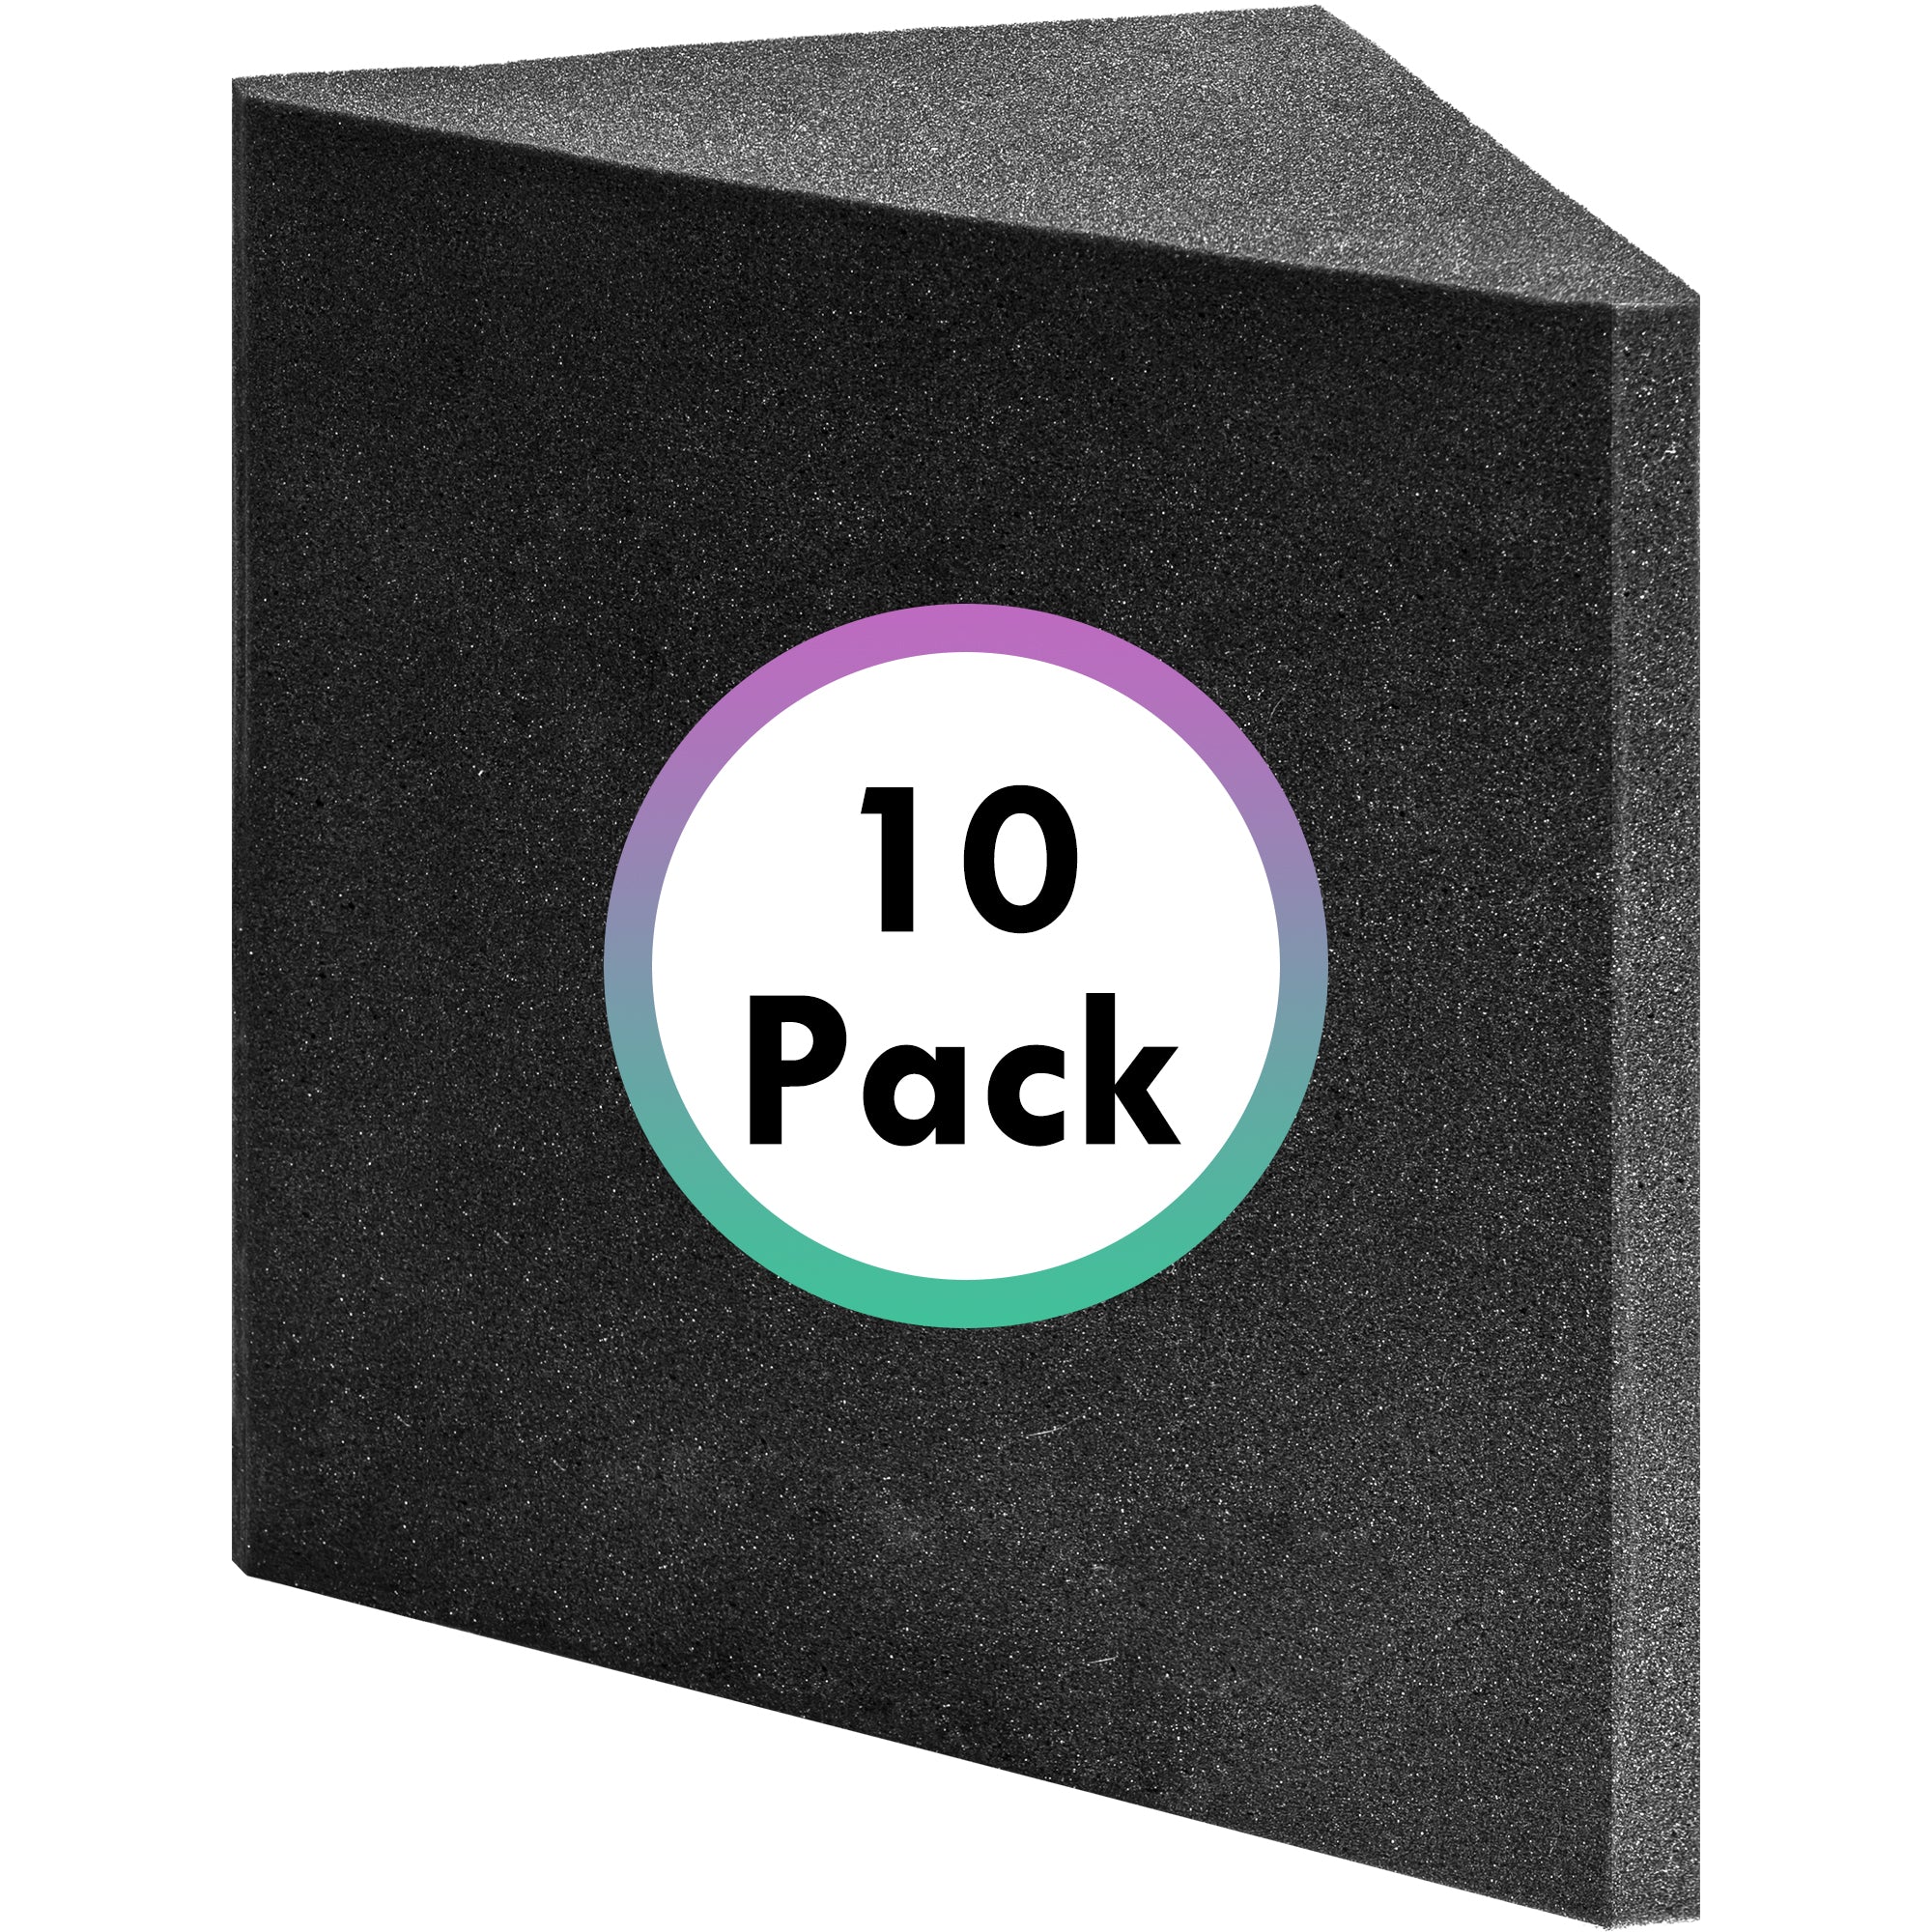 Foroomaco Delta Bass Traps 10 Packs